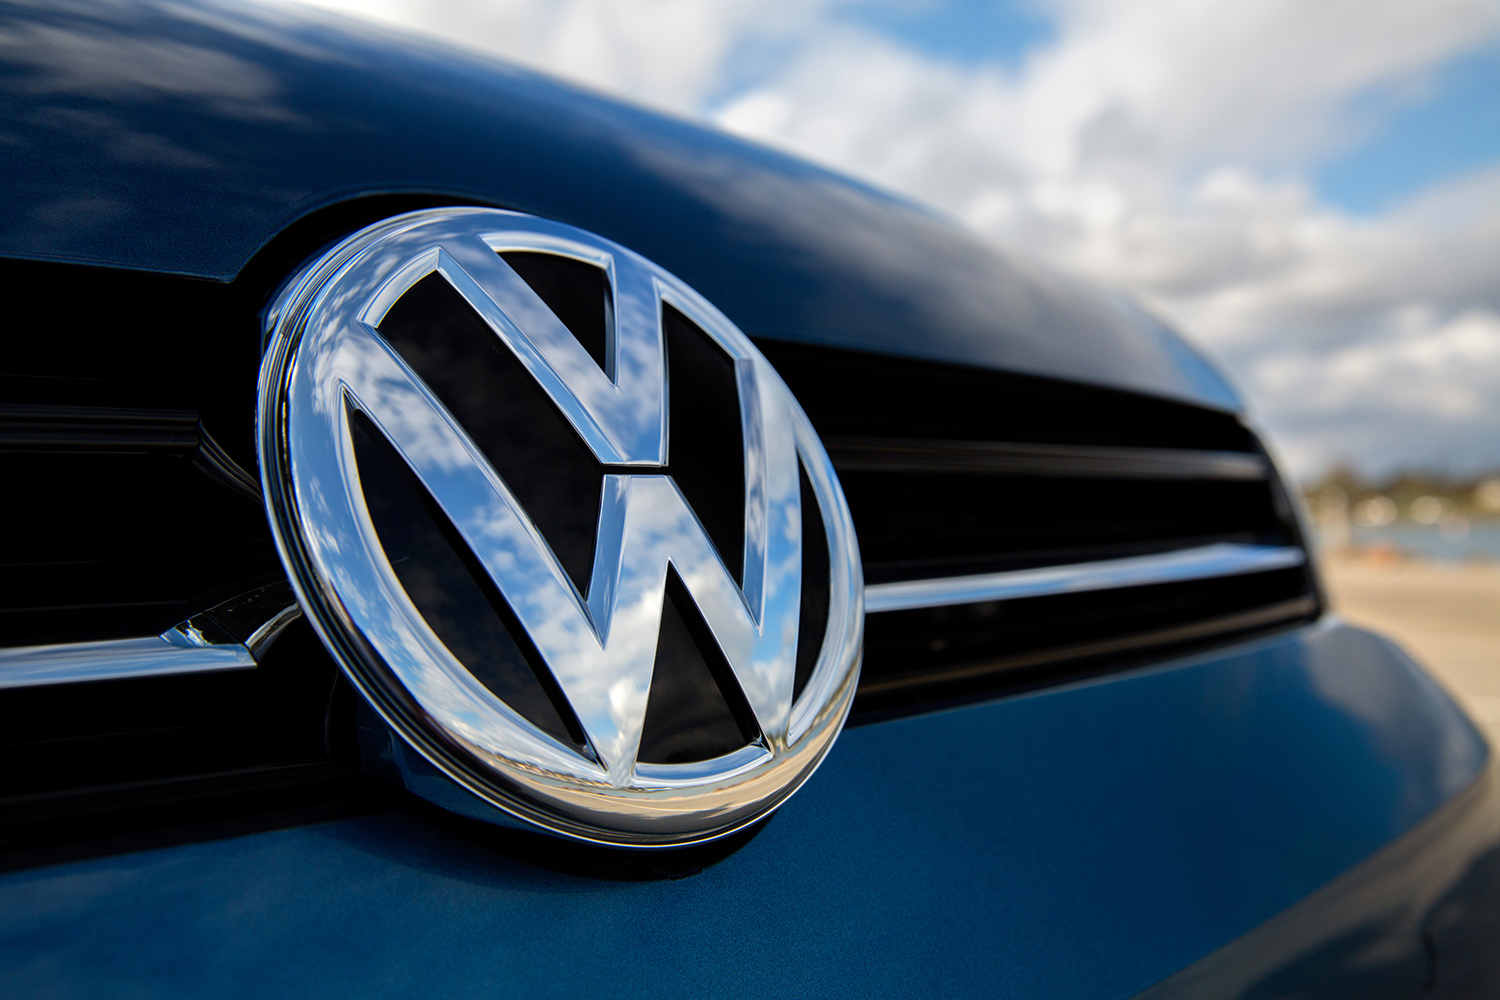 Volkswagen has become the world's biggest car brand